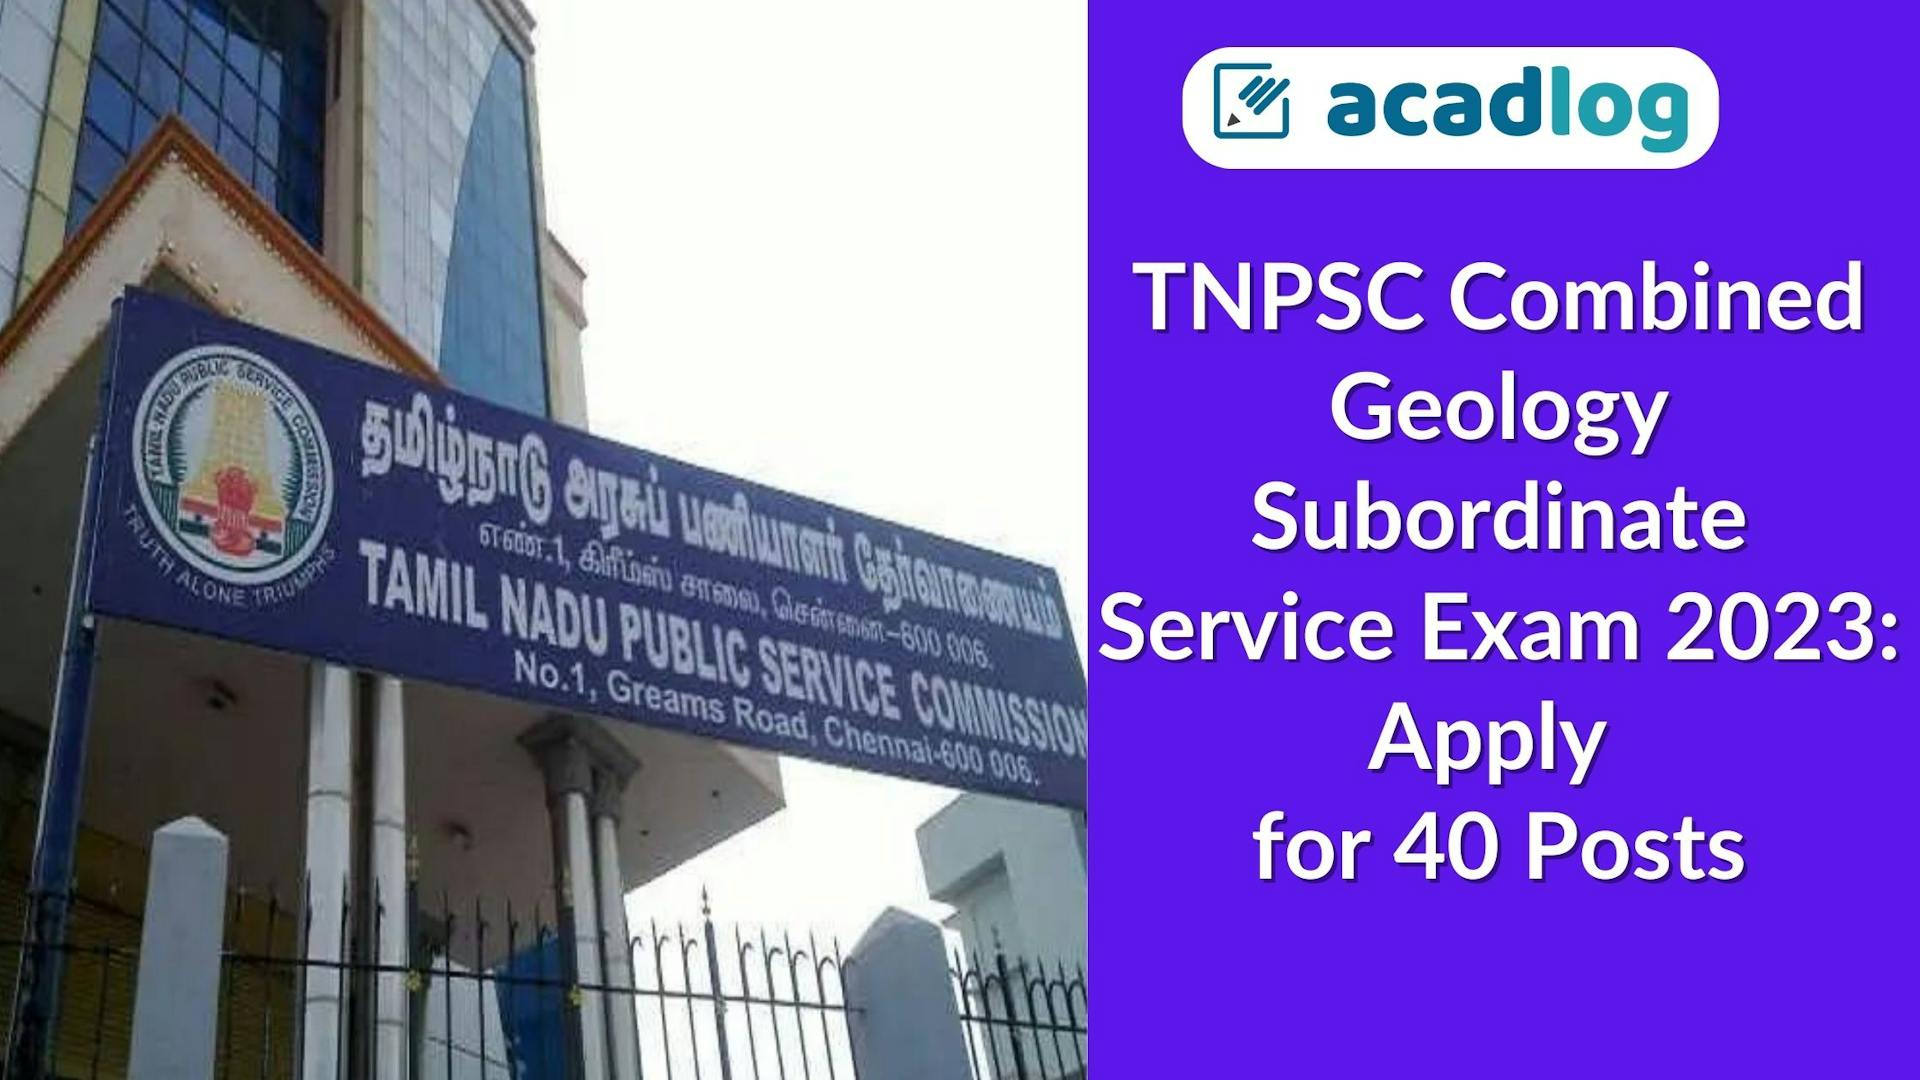 TNPSC Combined Geology Subordinate Service Exam 2023: Apply for 40 Posts